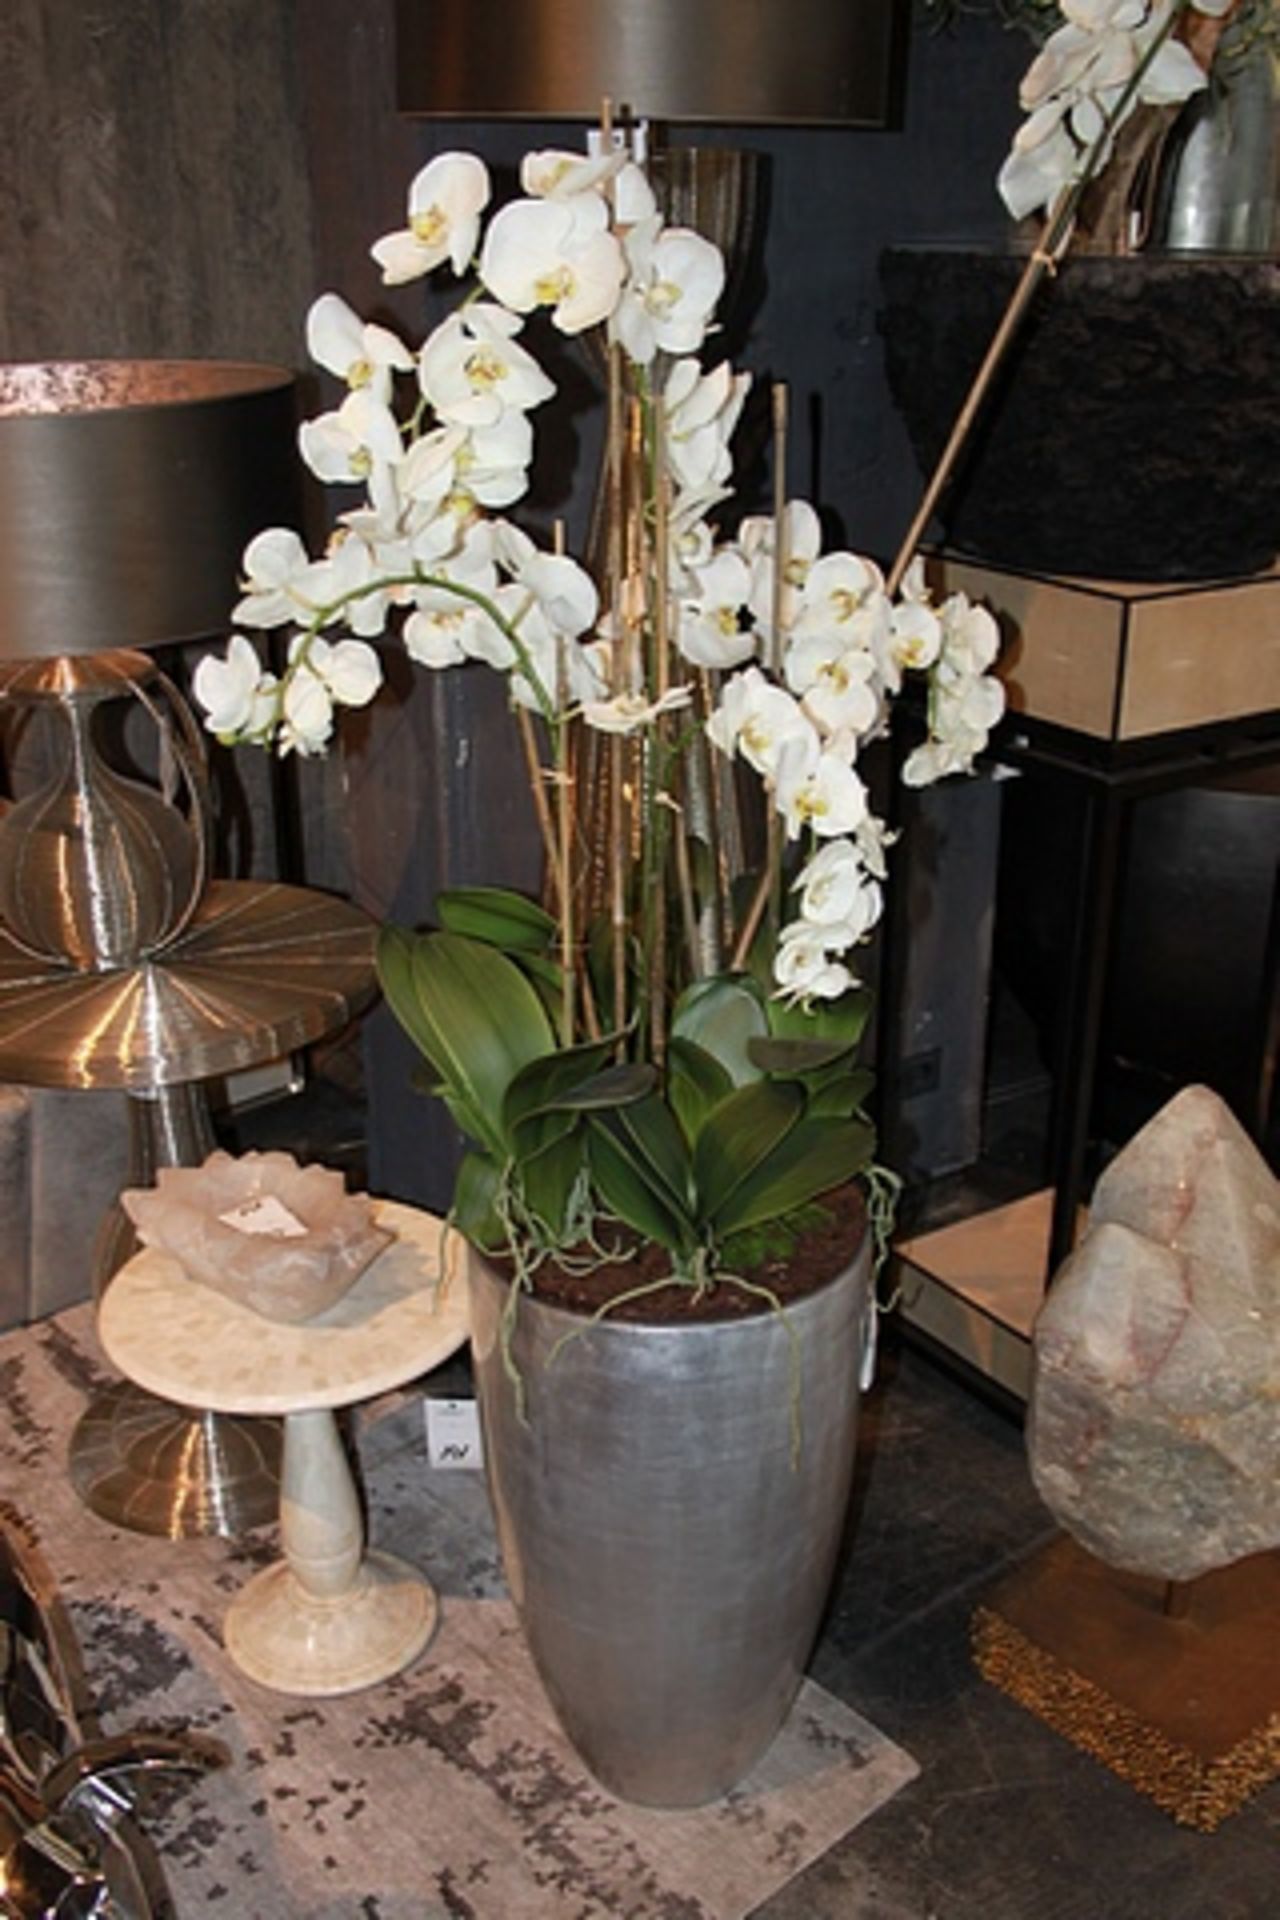 Vase George small silverleaf piece is delicately hand-crafted by artisans exquisite artistic